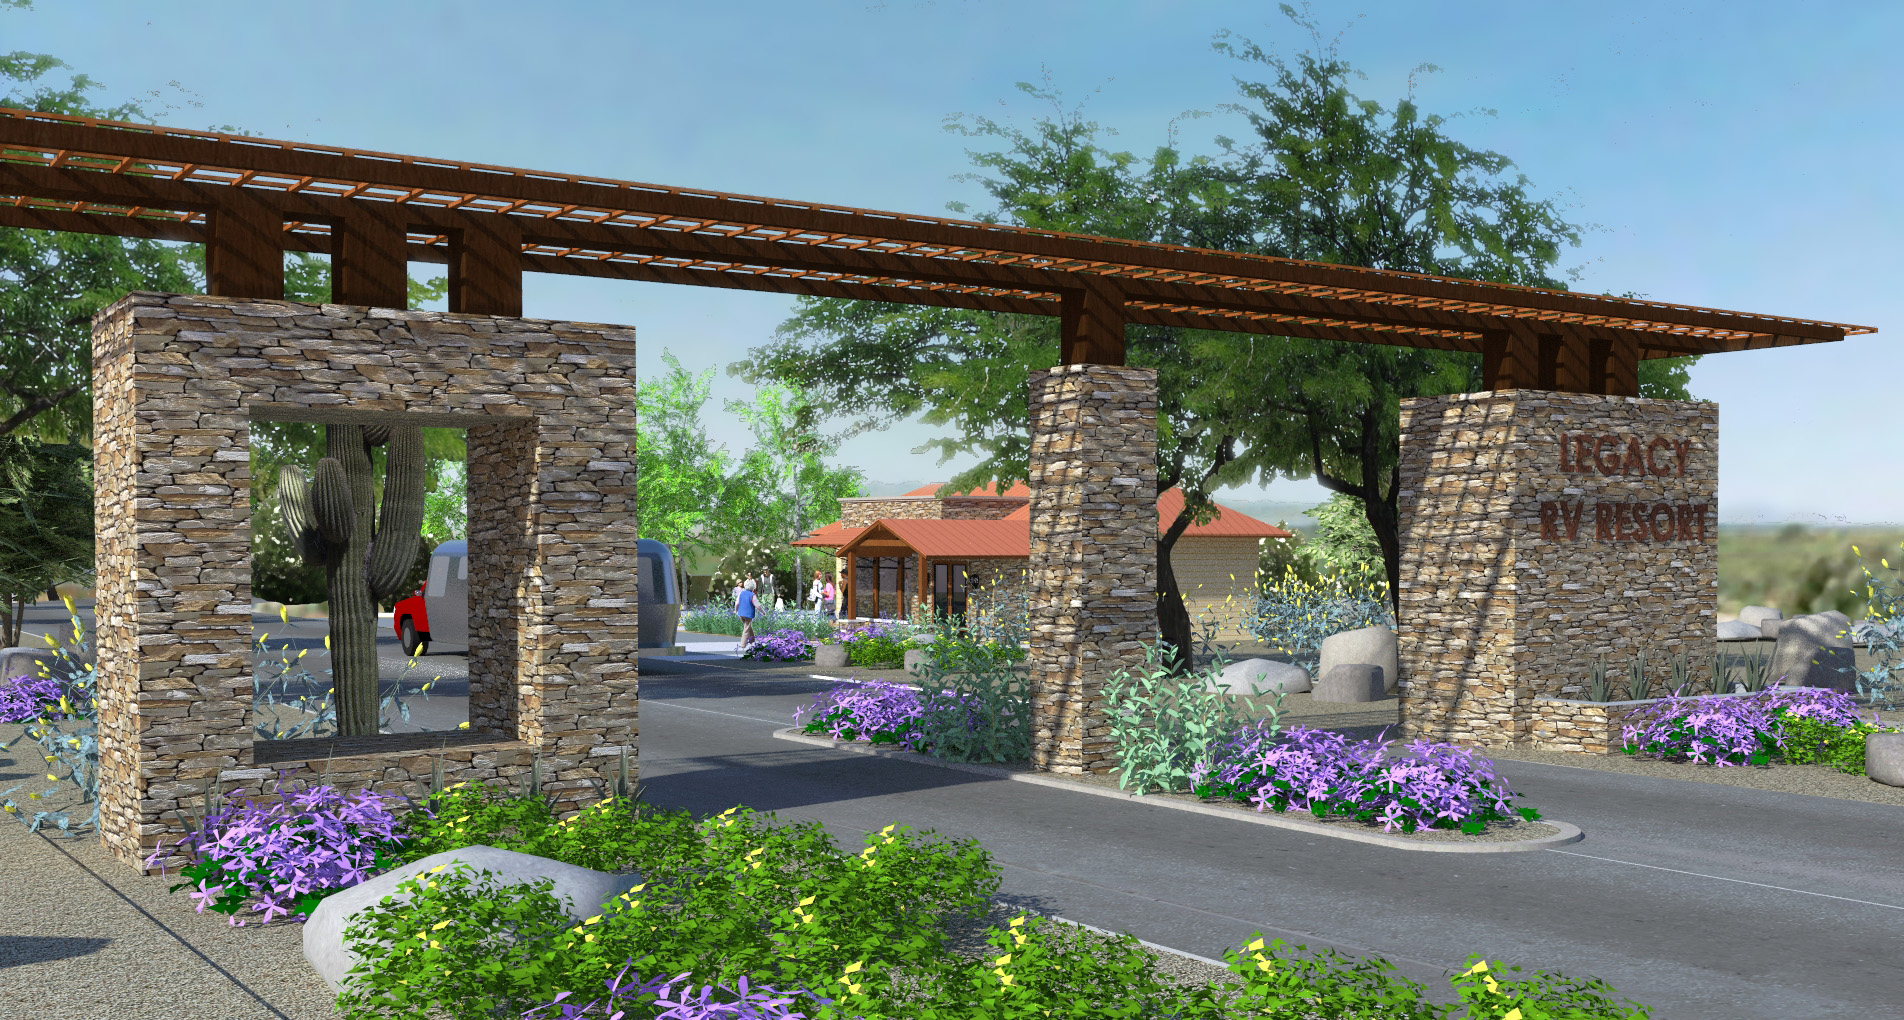 Image of entry monument to RV resort. Monolithic stone columns support a metal lattice over the road. Metal letters on one column read, "Legacy RV Resort." Along the road are desert-adapted groundcovers, agaves, and trees.